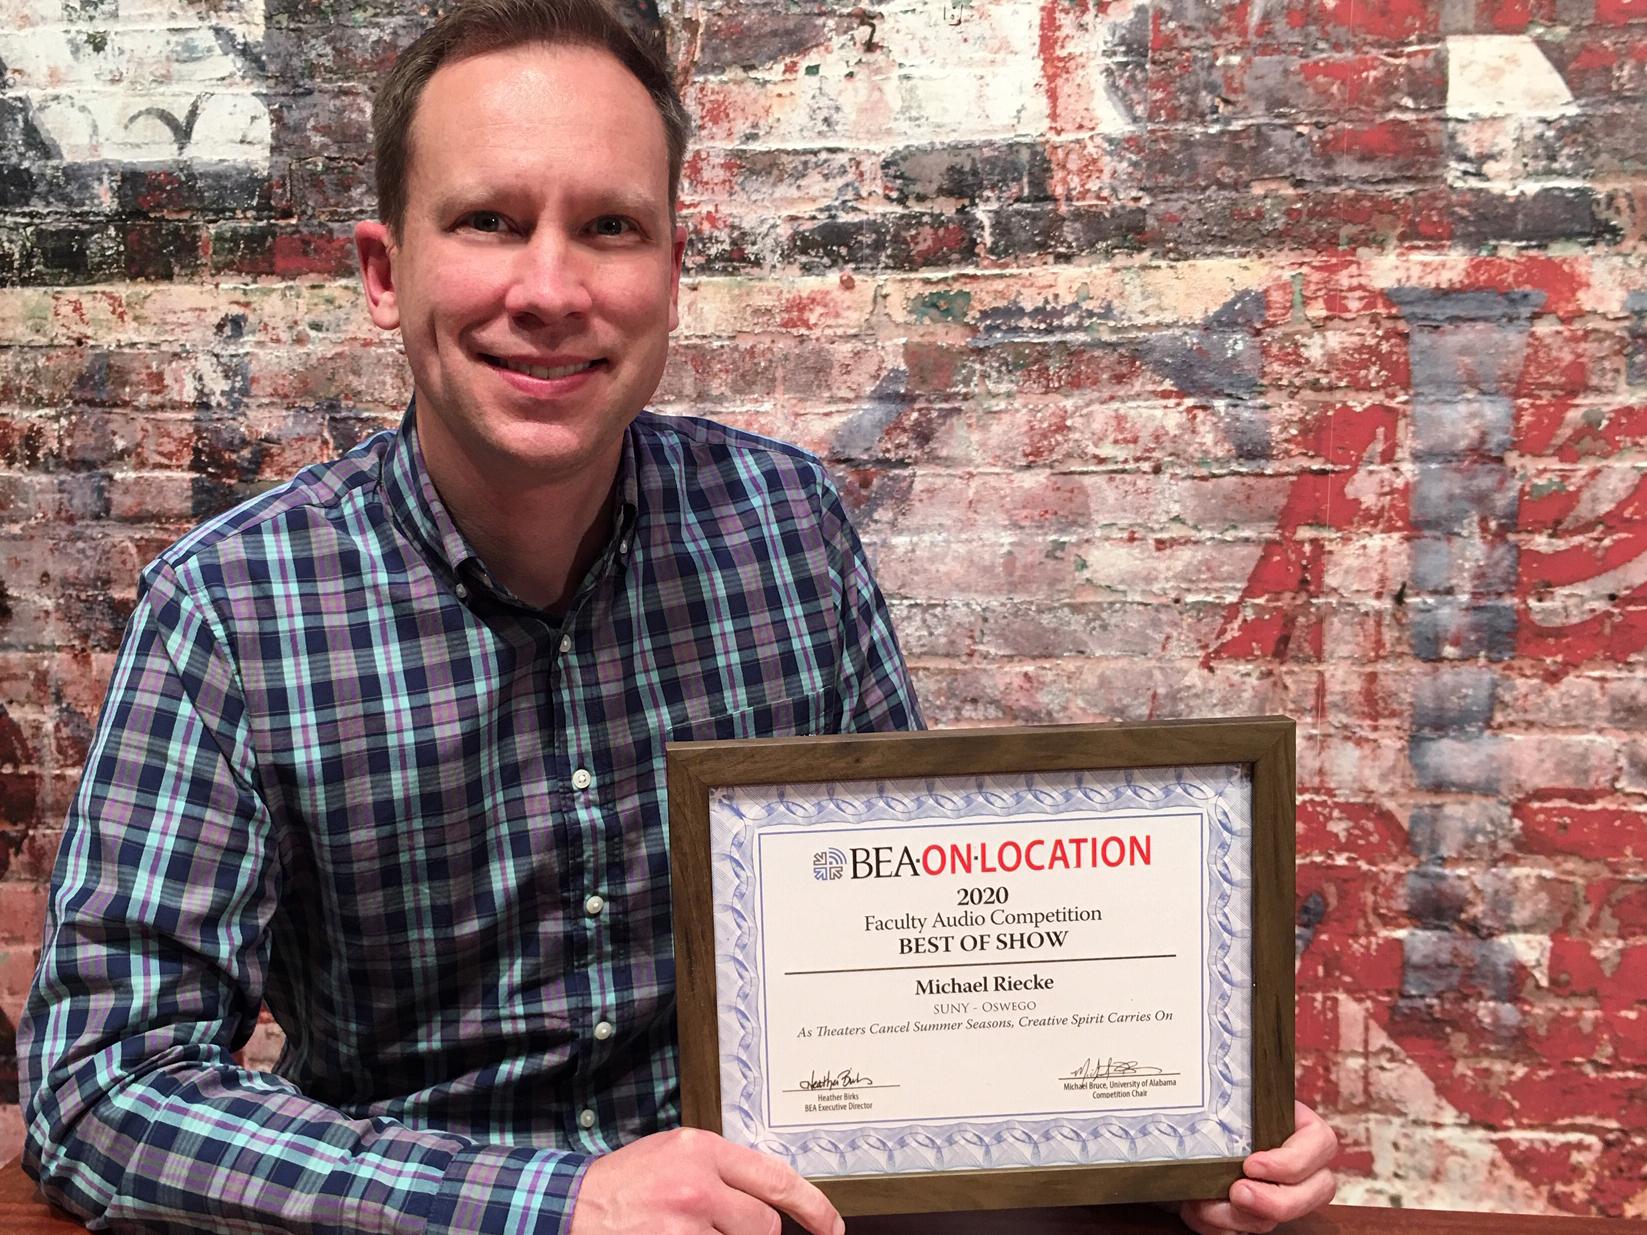 Michael Riecke of communication studies won a national Best of Show award for an audio story on theatres and performers reacting to the pandemic's curtailing of shows